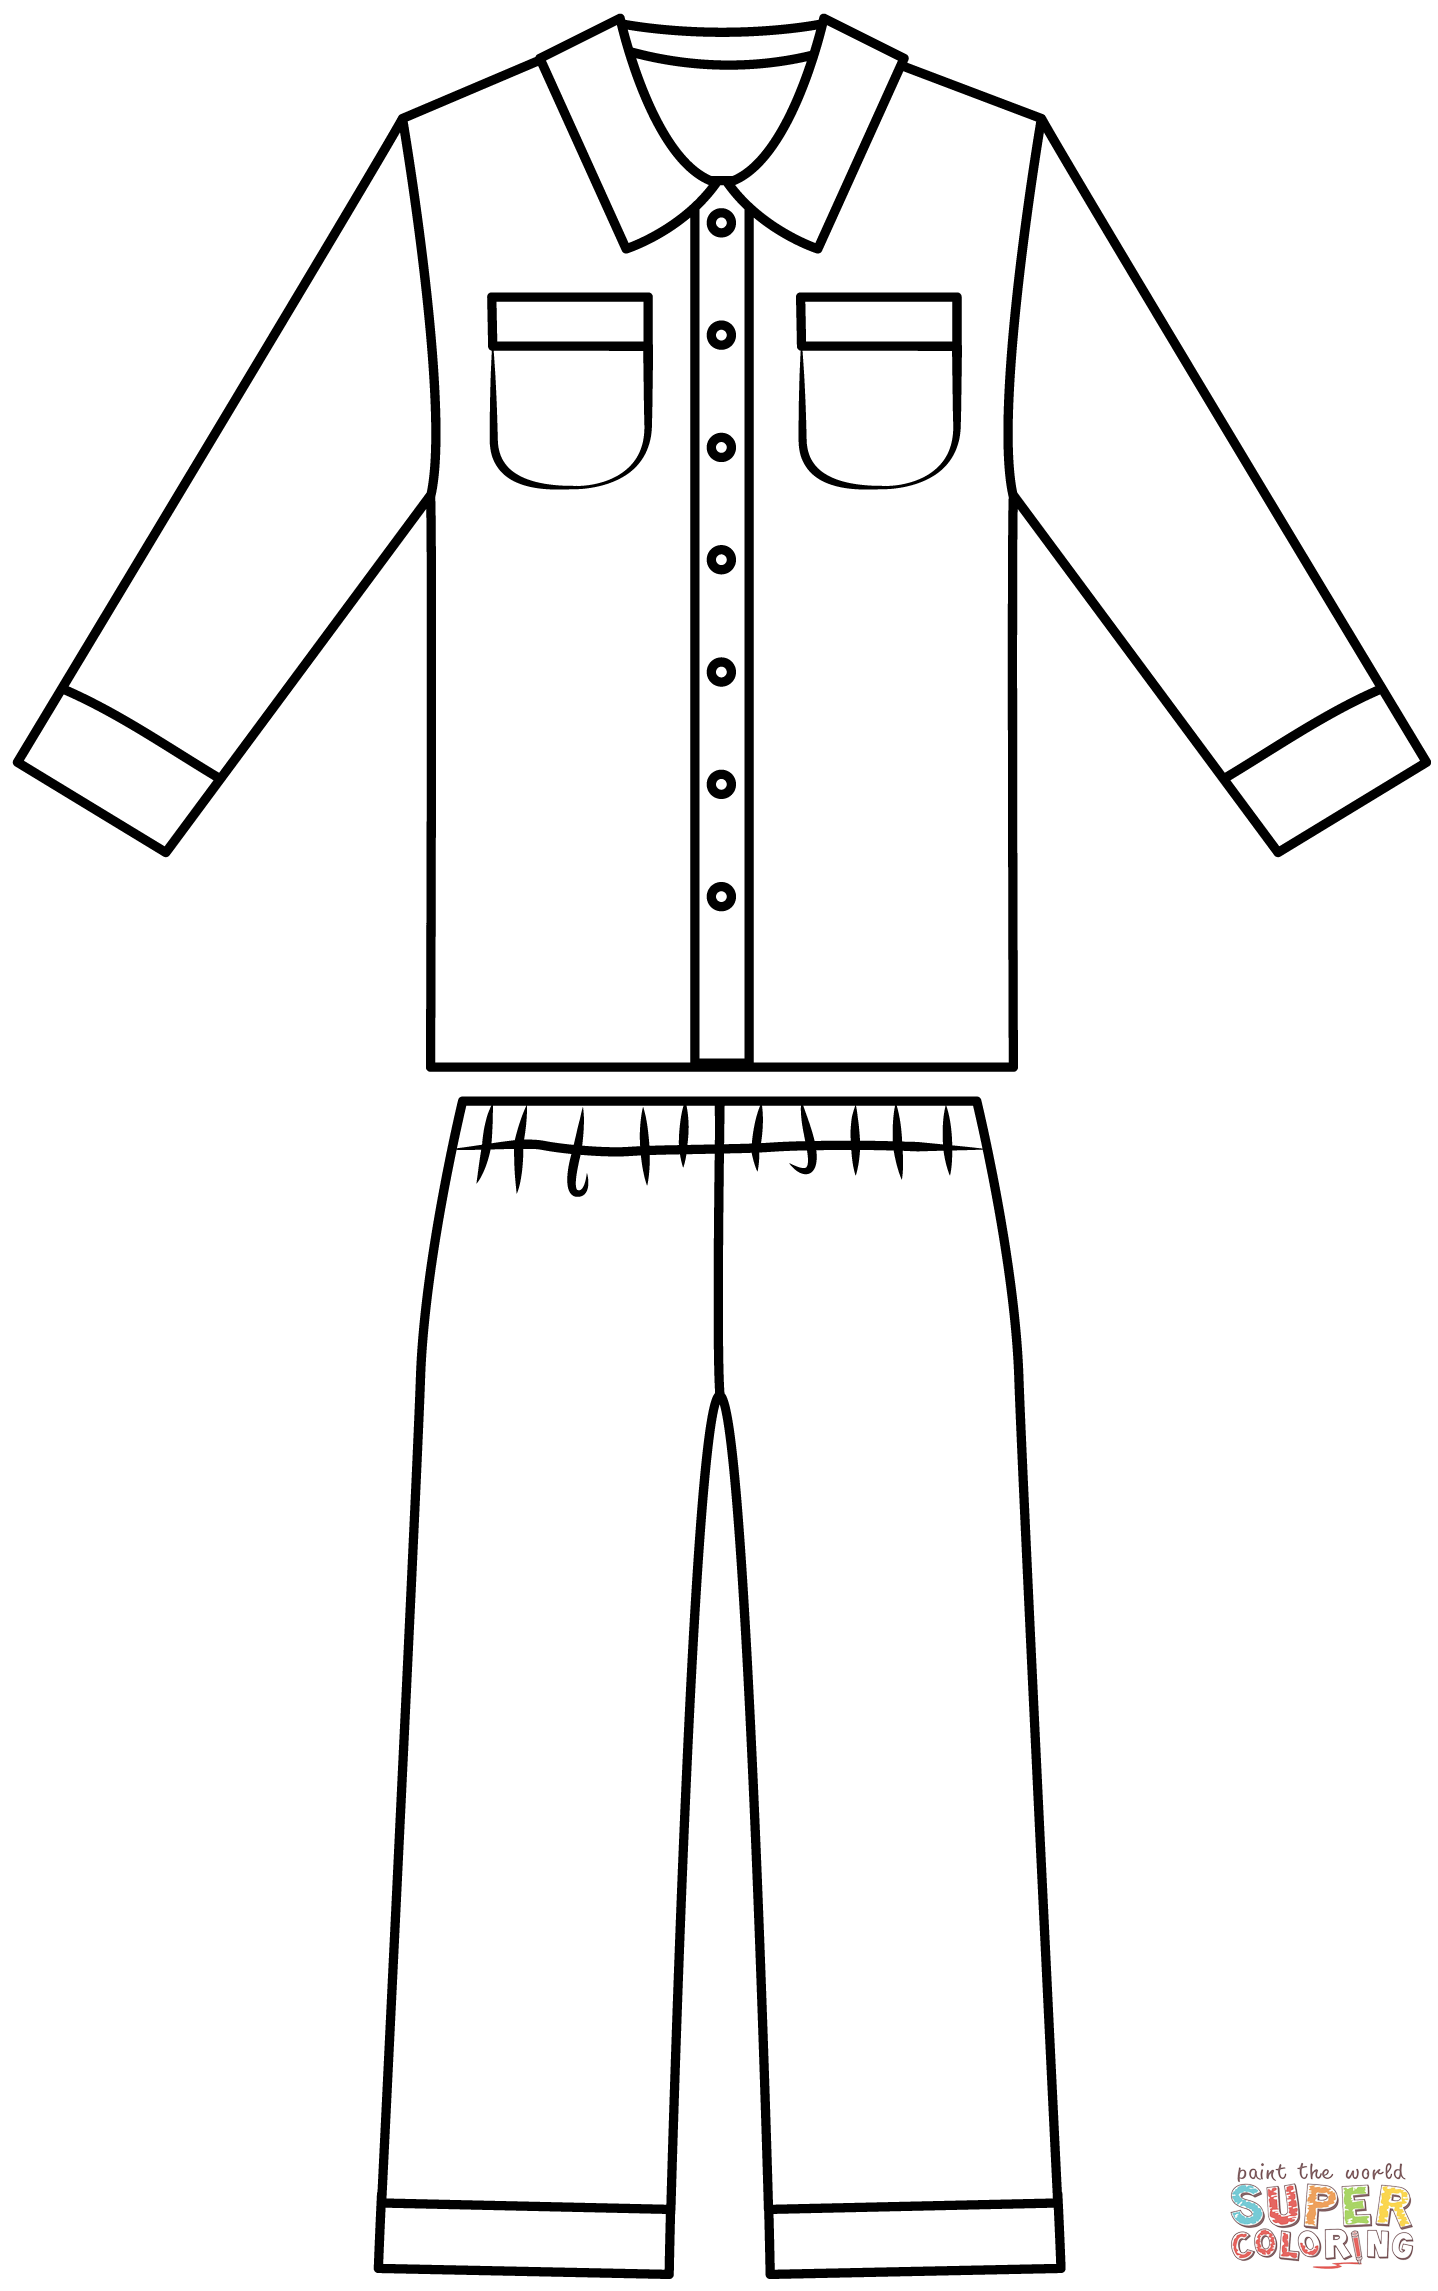 Pajama coloring page free printable coloring pages